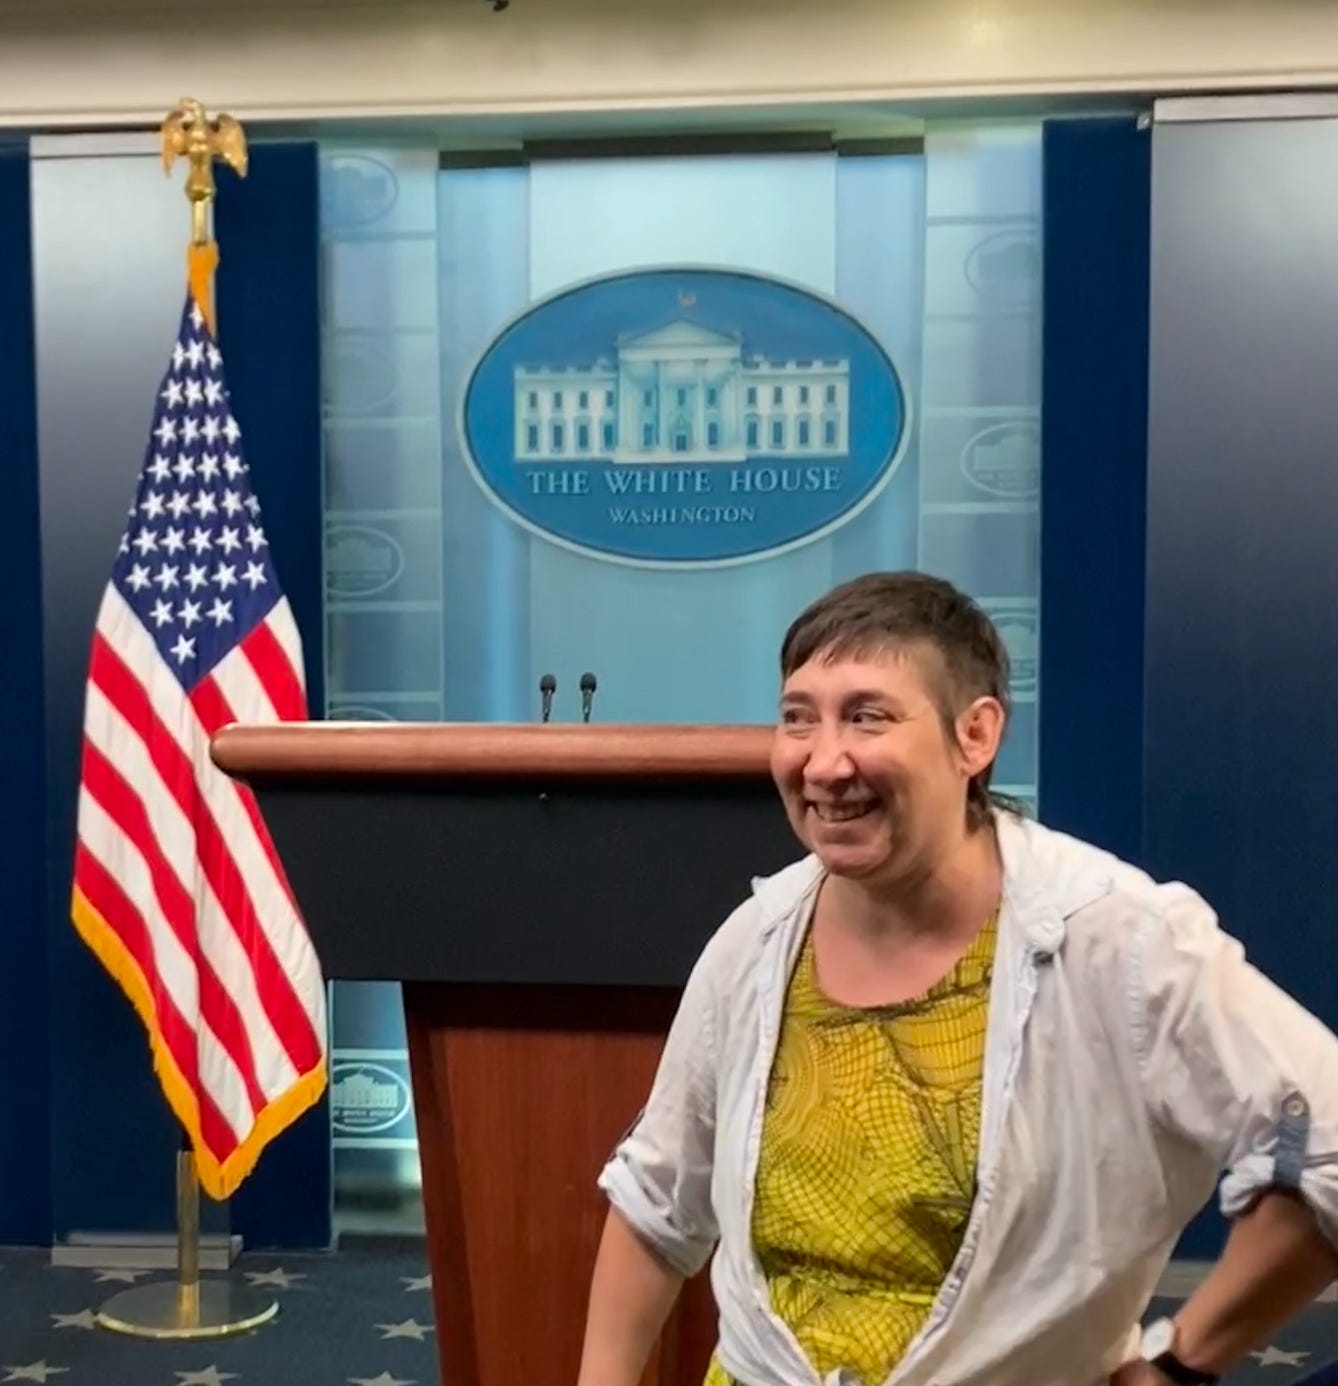 me, a white person, wearing a yellow dress and a blue button up shirt, in front of the white house press pool room